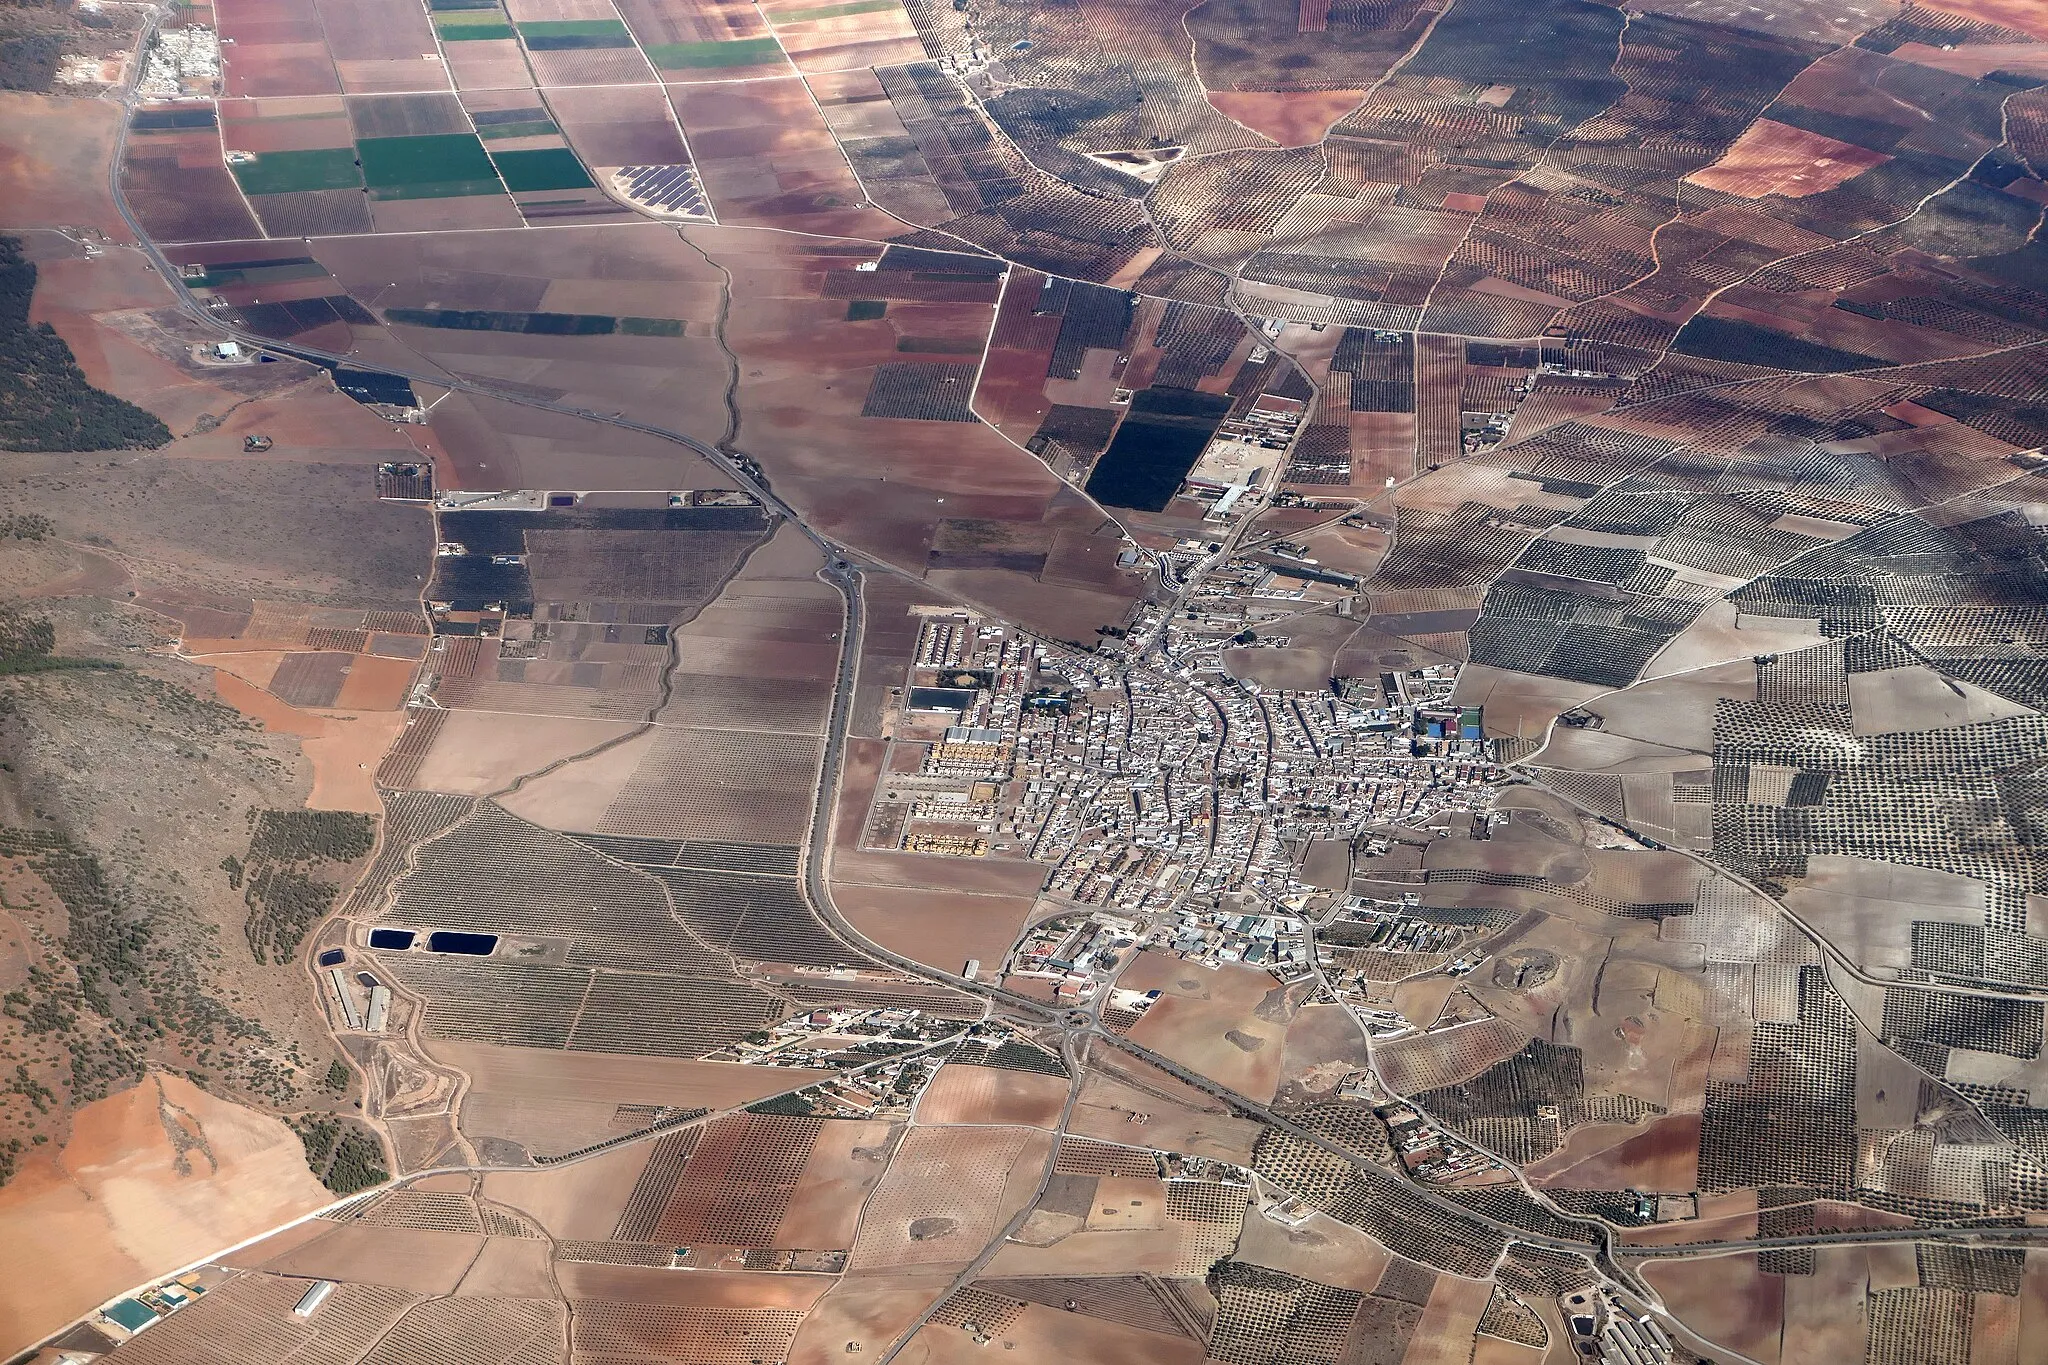 Photo showing: An aerial view of Sierra de Yeguas, a town in the south of Spain.